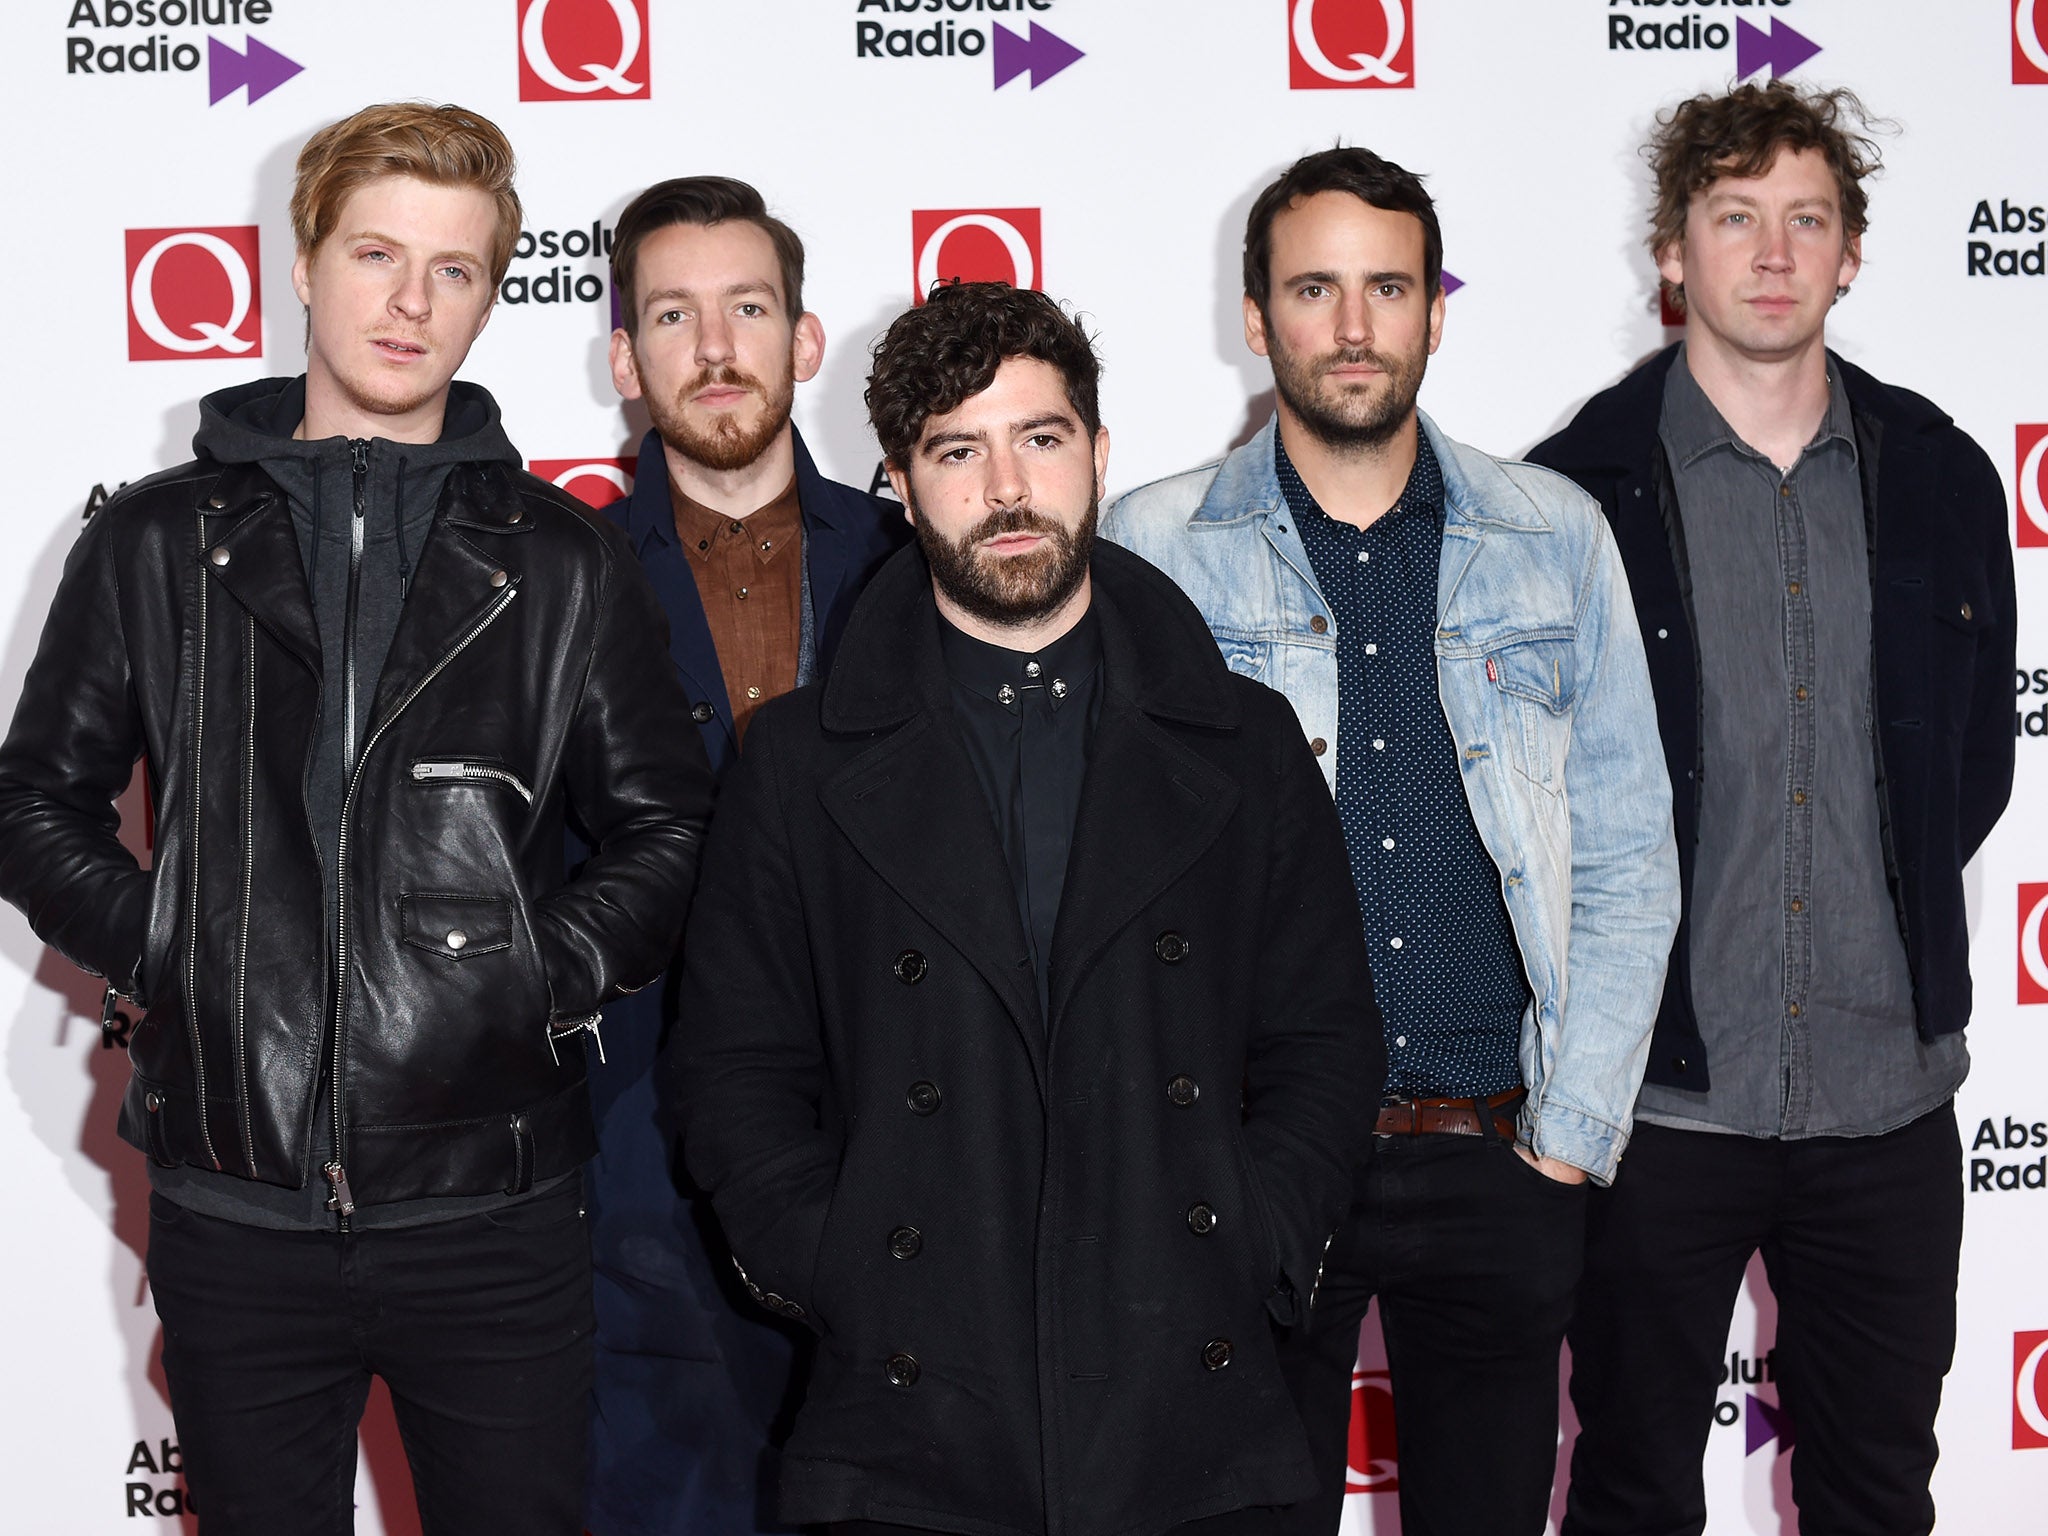 Formed in 2005, Foals, fronted by singer Yannis Philippakis, have become a headline festival act and will play their first Wembley Arena show next year.